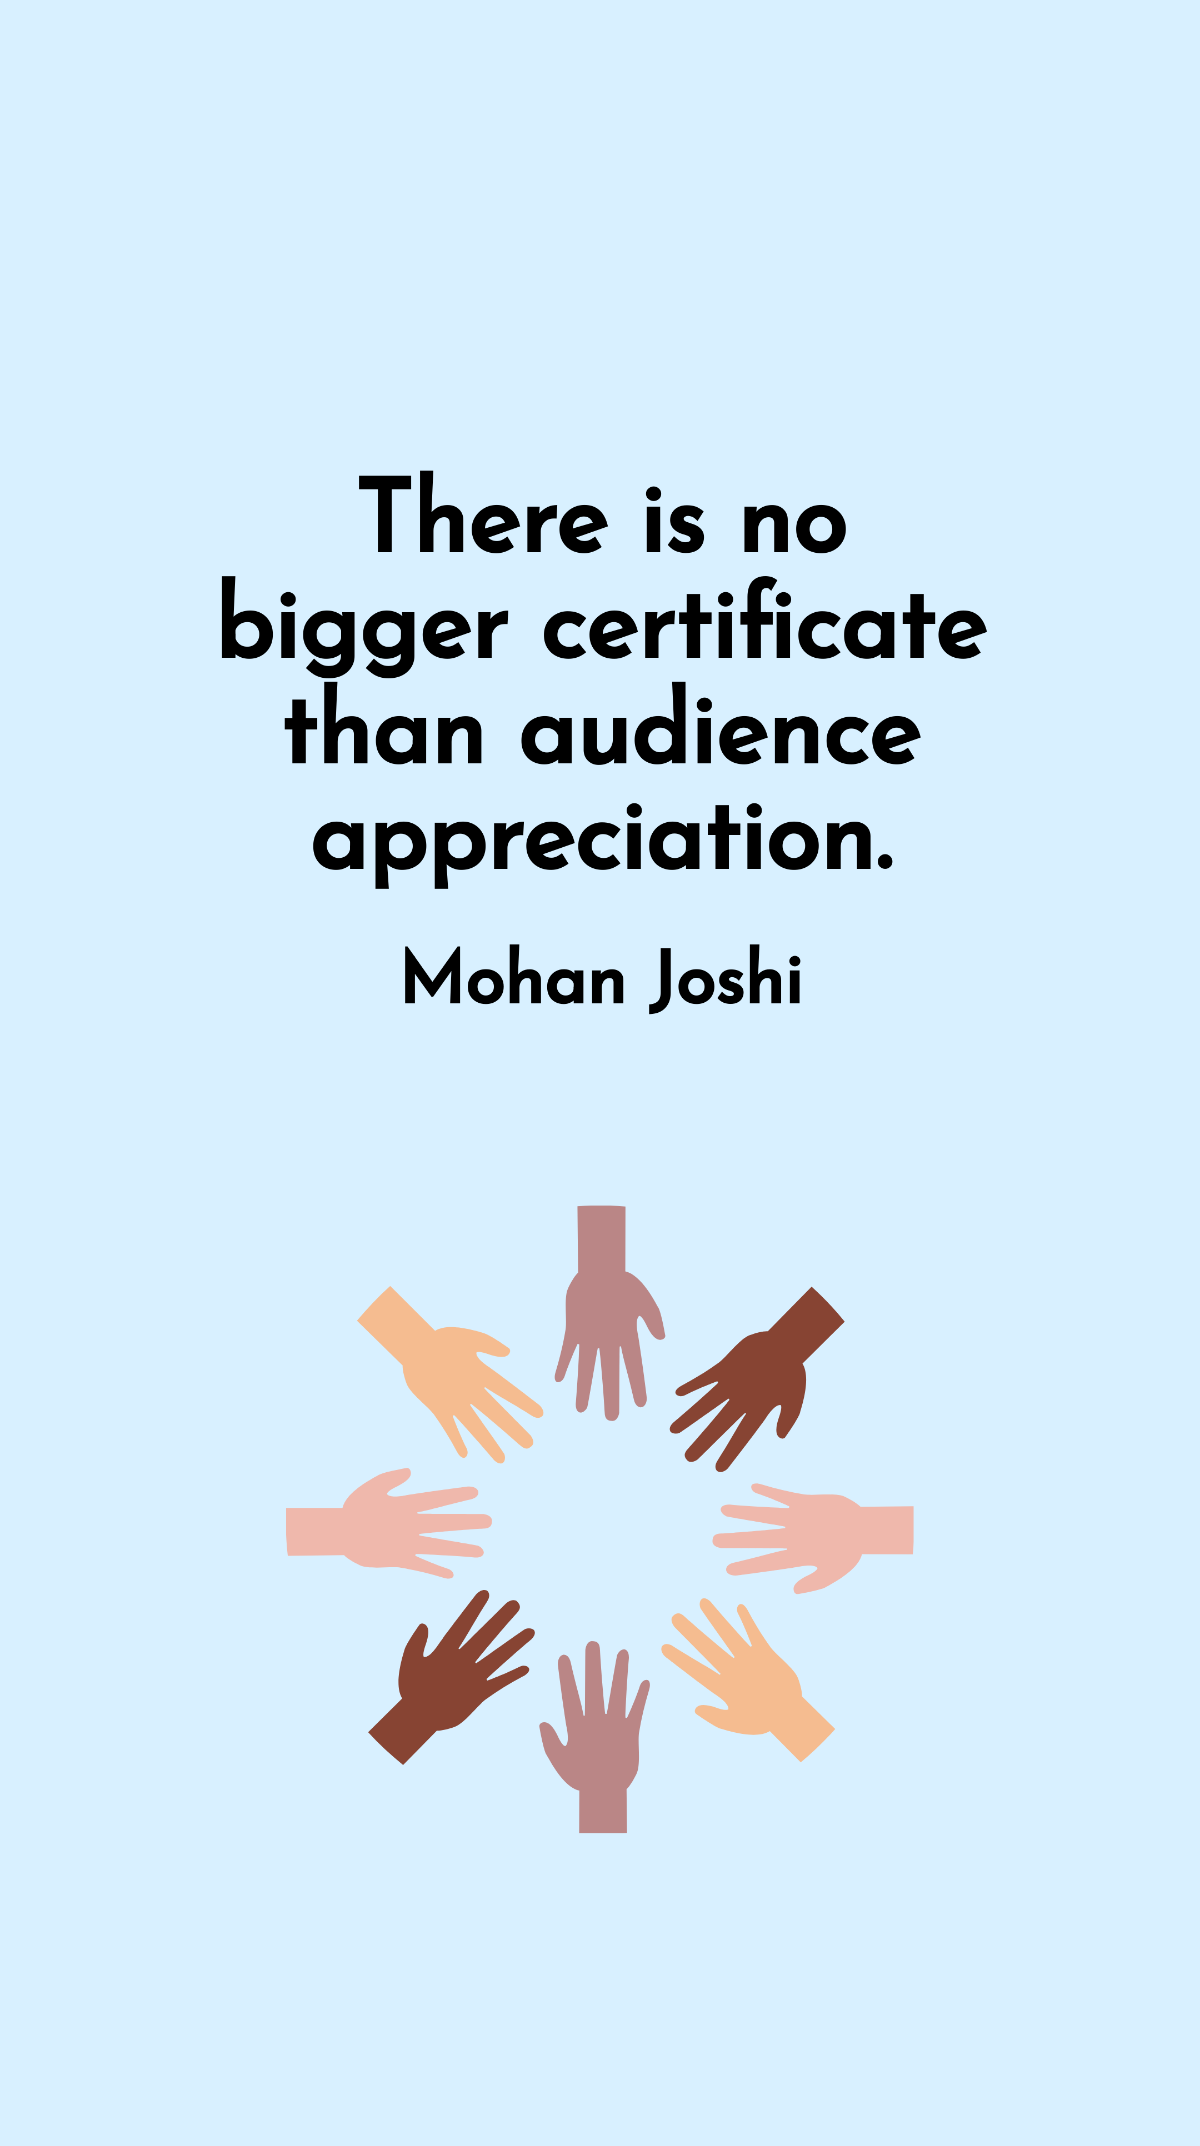 Free Mohan Joshi - There is no bigger certificate than audience appreciation. Template